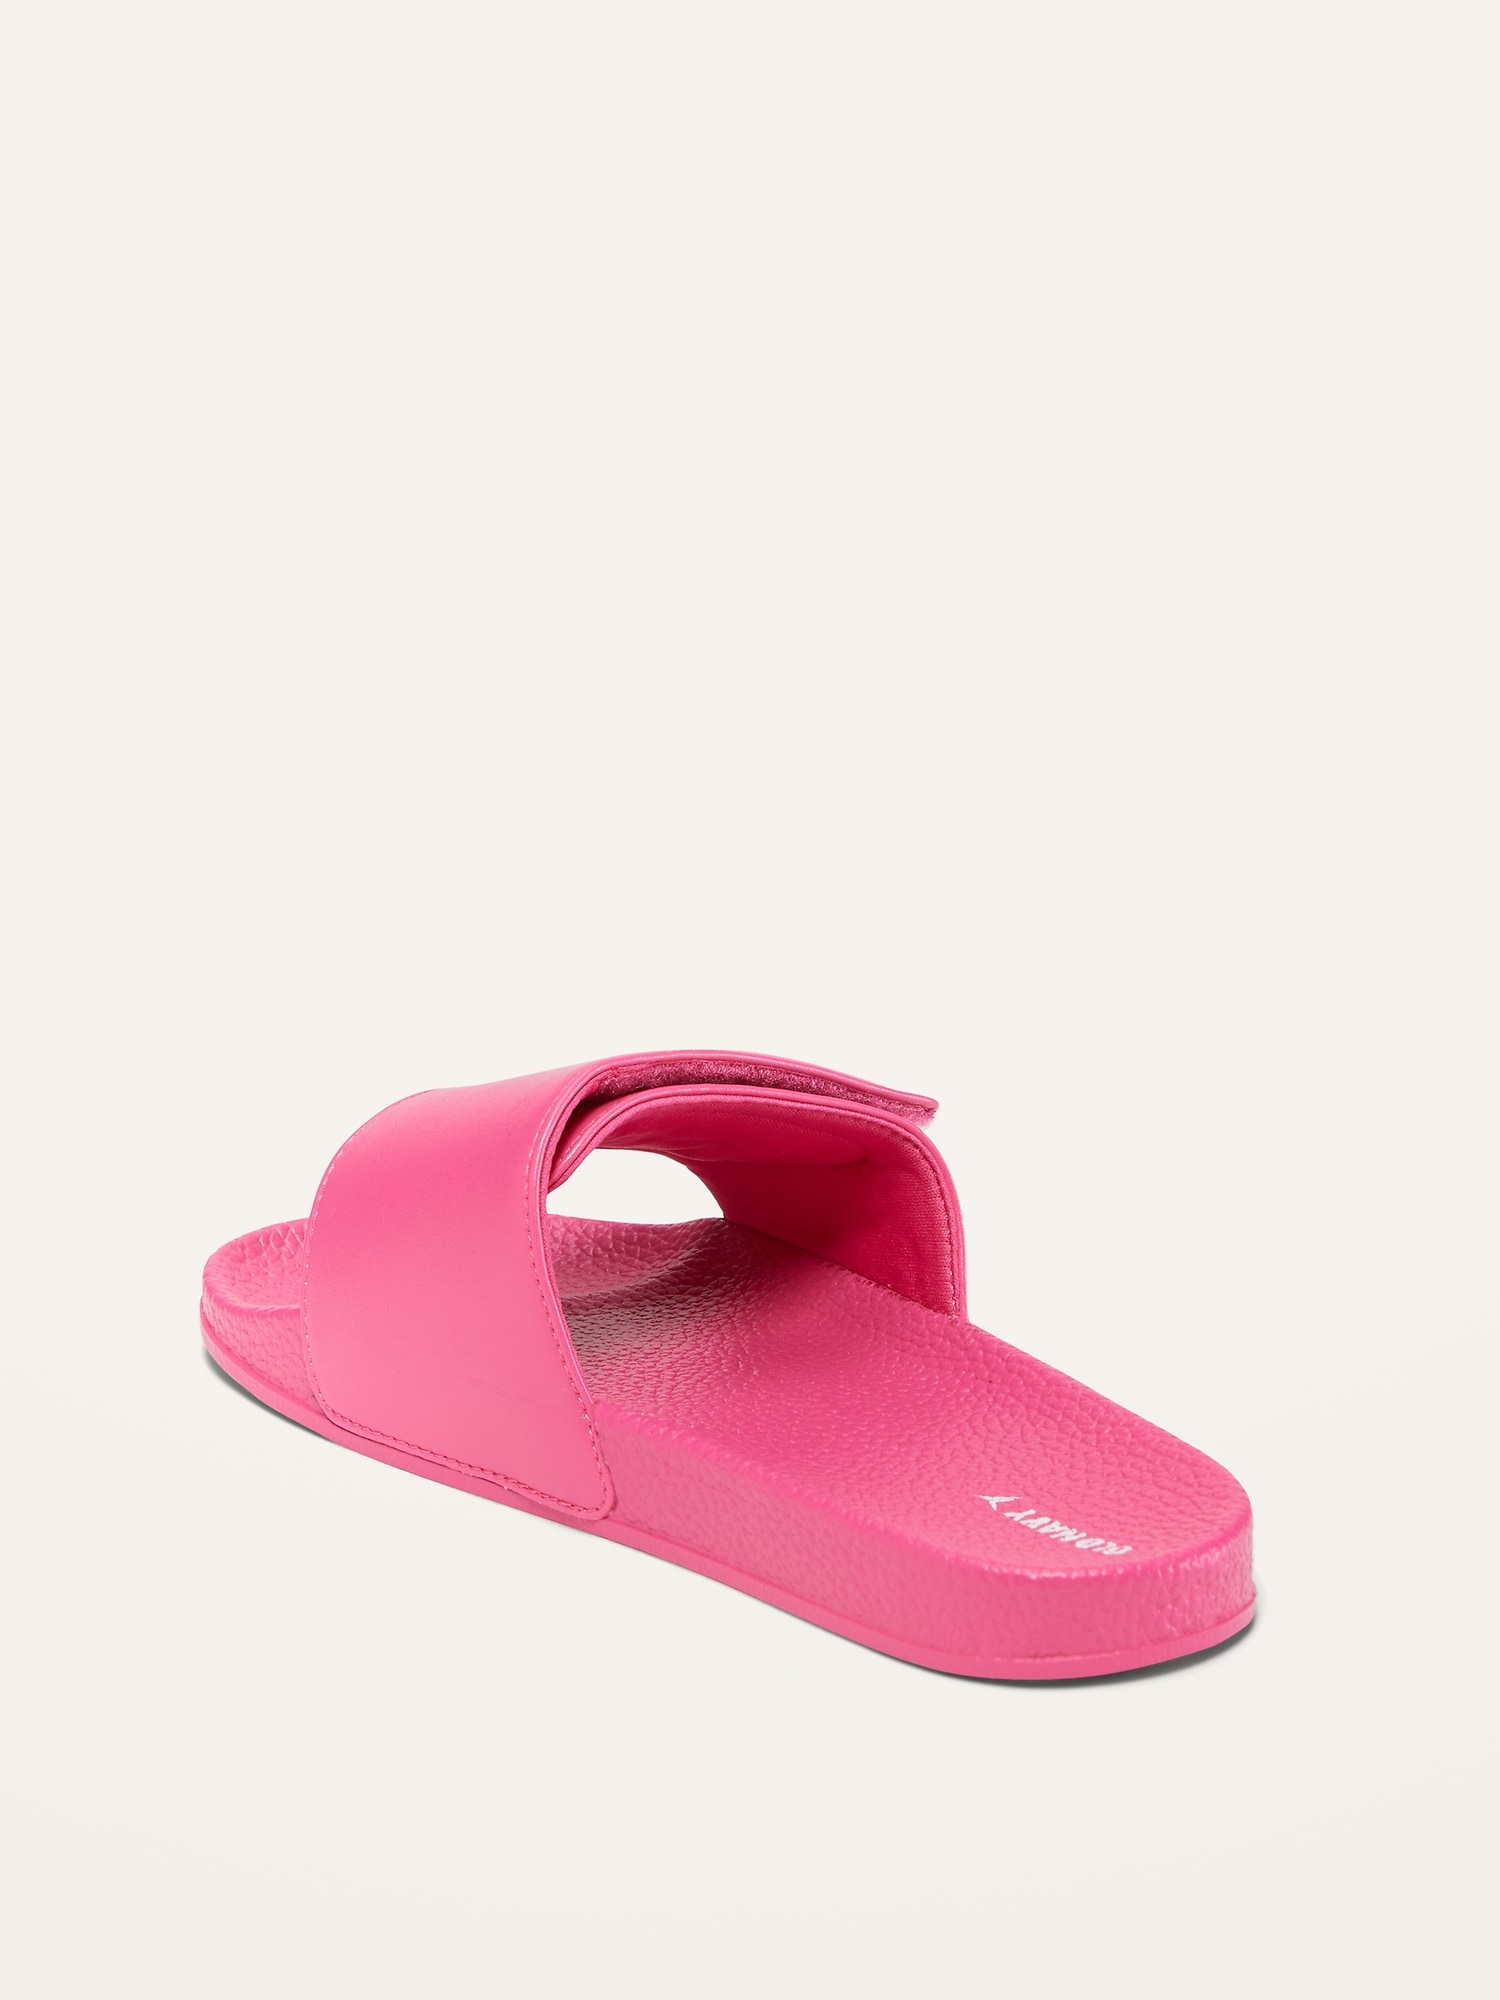 Faux-Leather Slide Sandals for Girls | Old Navy